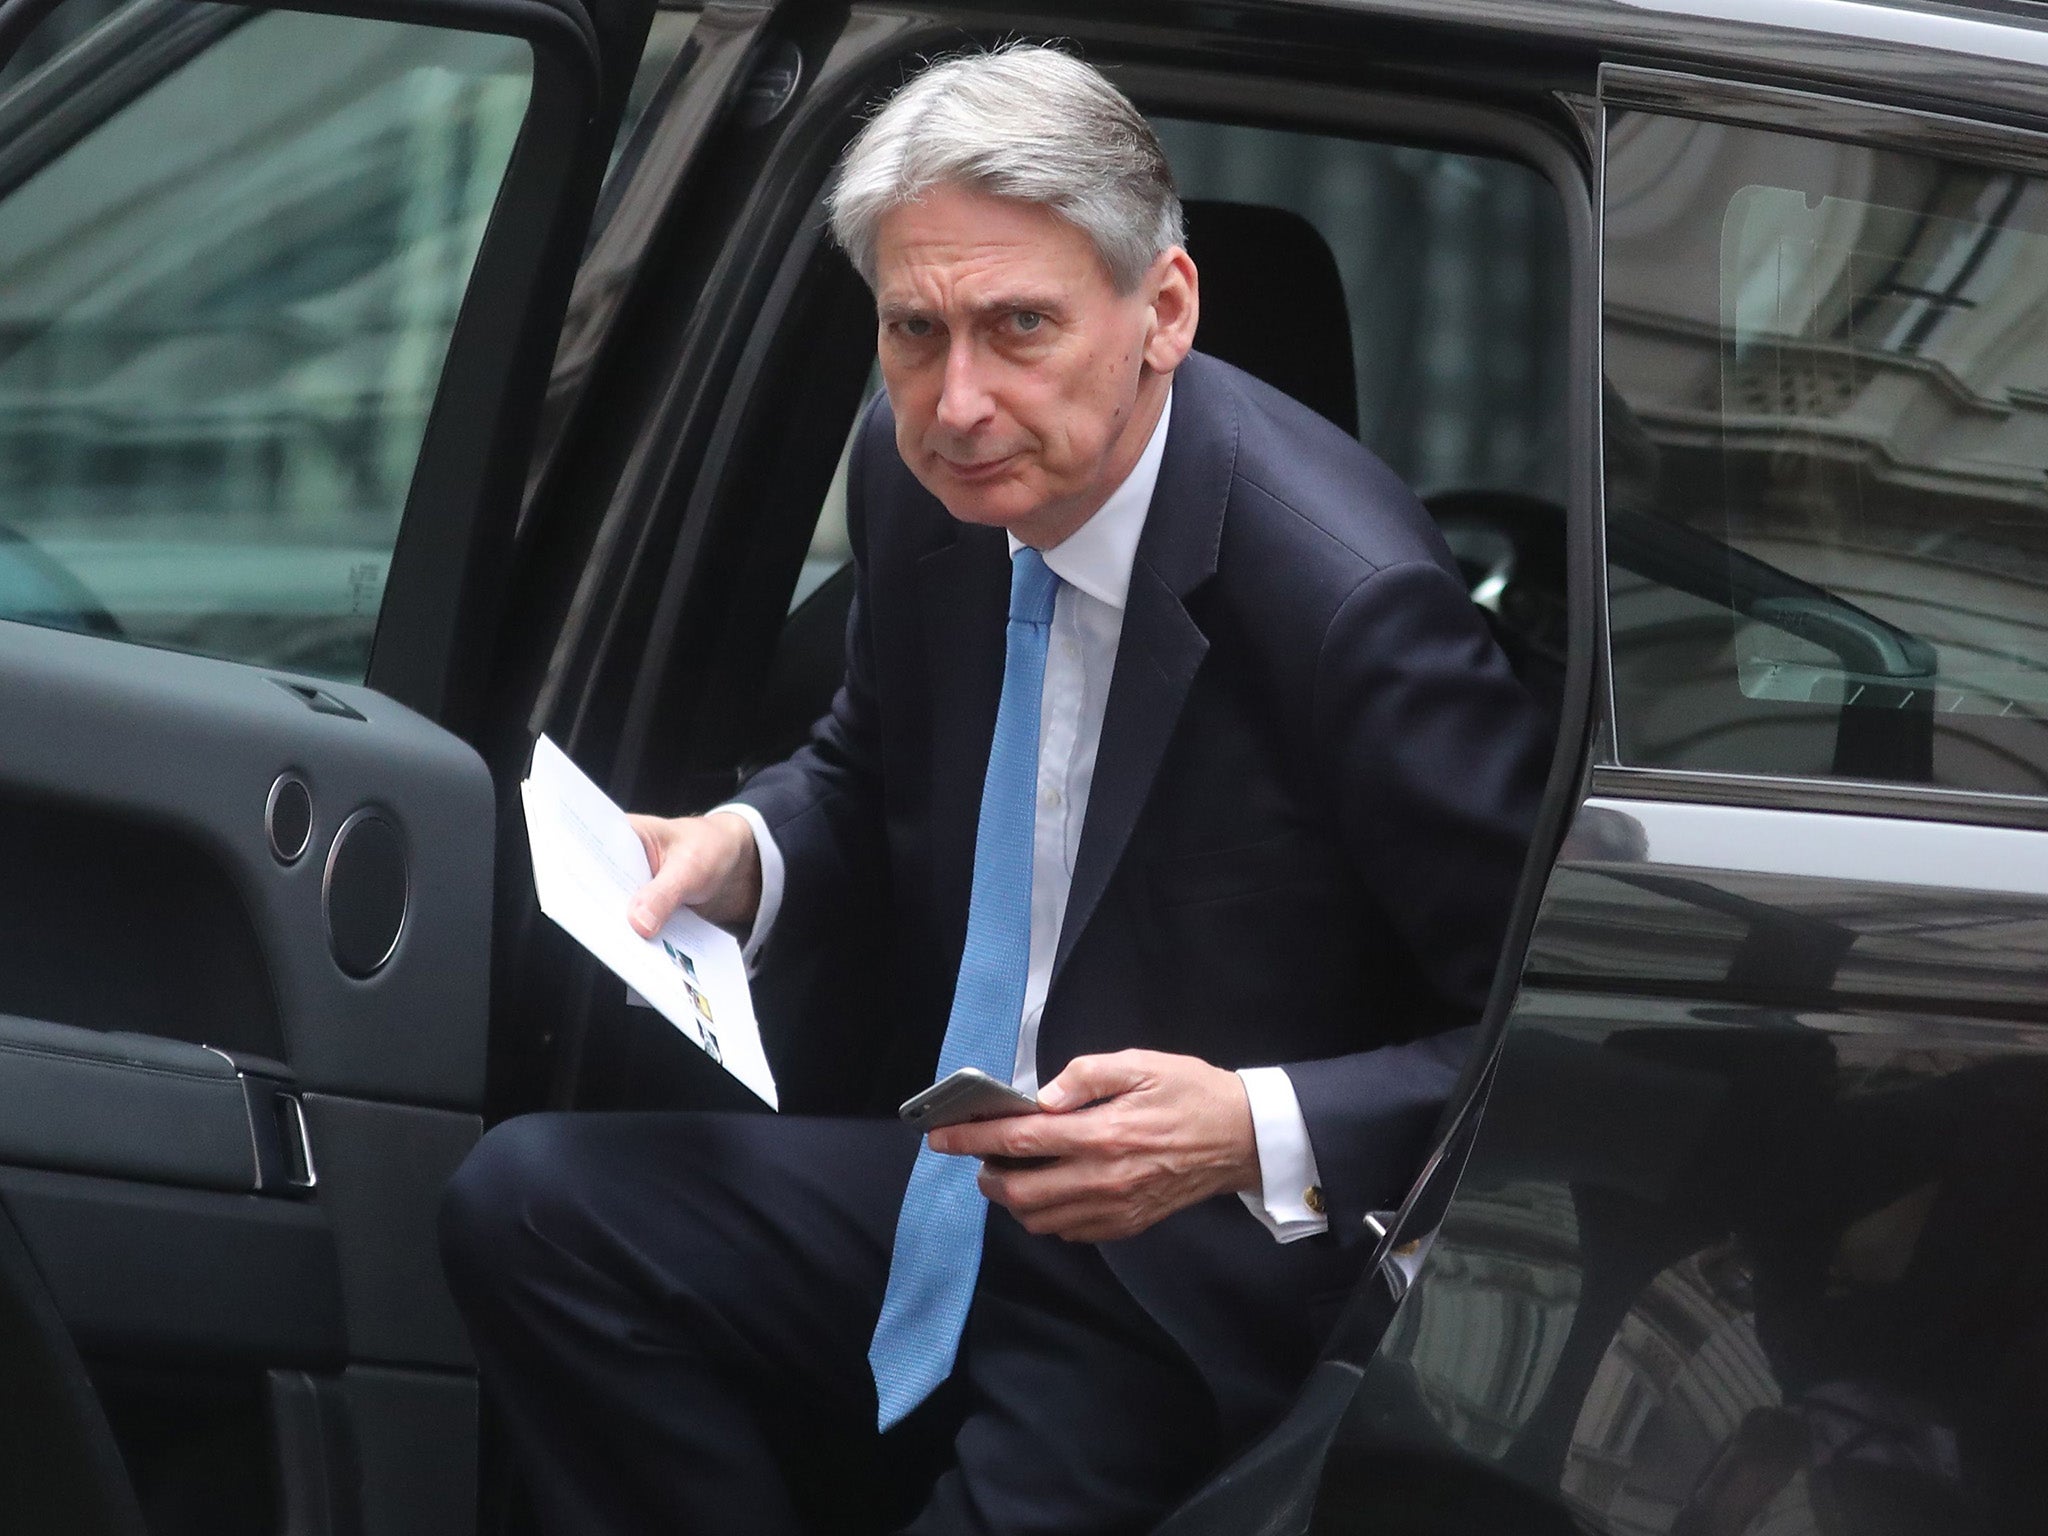 Disability Rights UK says there is not a shred of evidence to back up Hammond’s assertion.